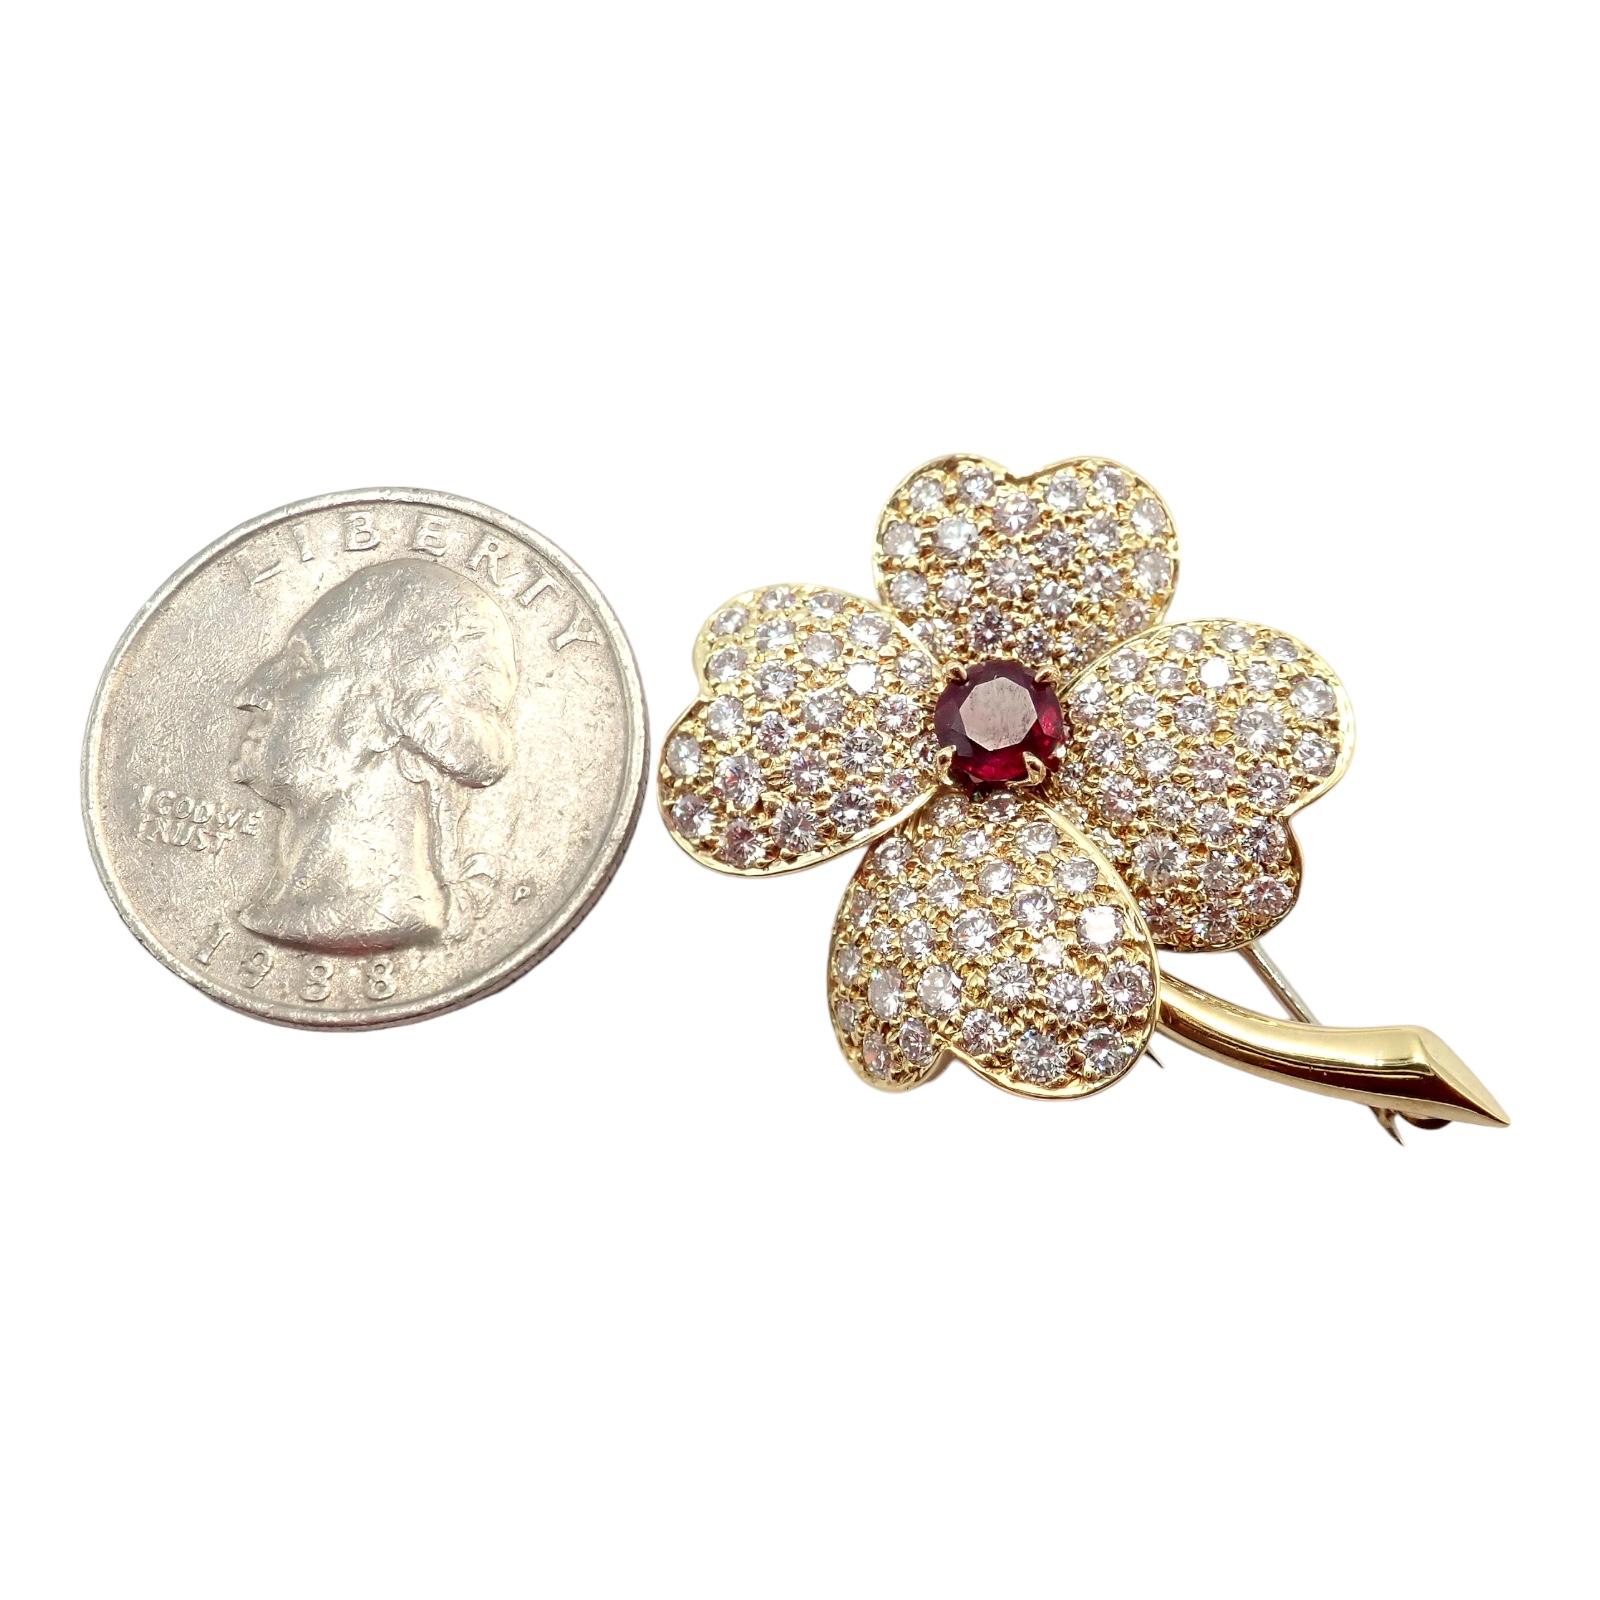 Van Cleef & Arpels Cosmos Diamond And Ruby Yellow Gold Pendant Brooch In Excellent Condition For Sale In Holland, PA